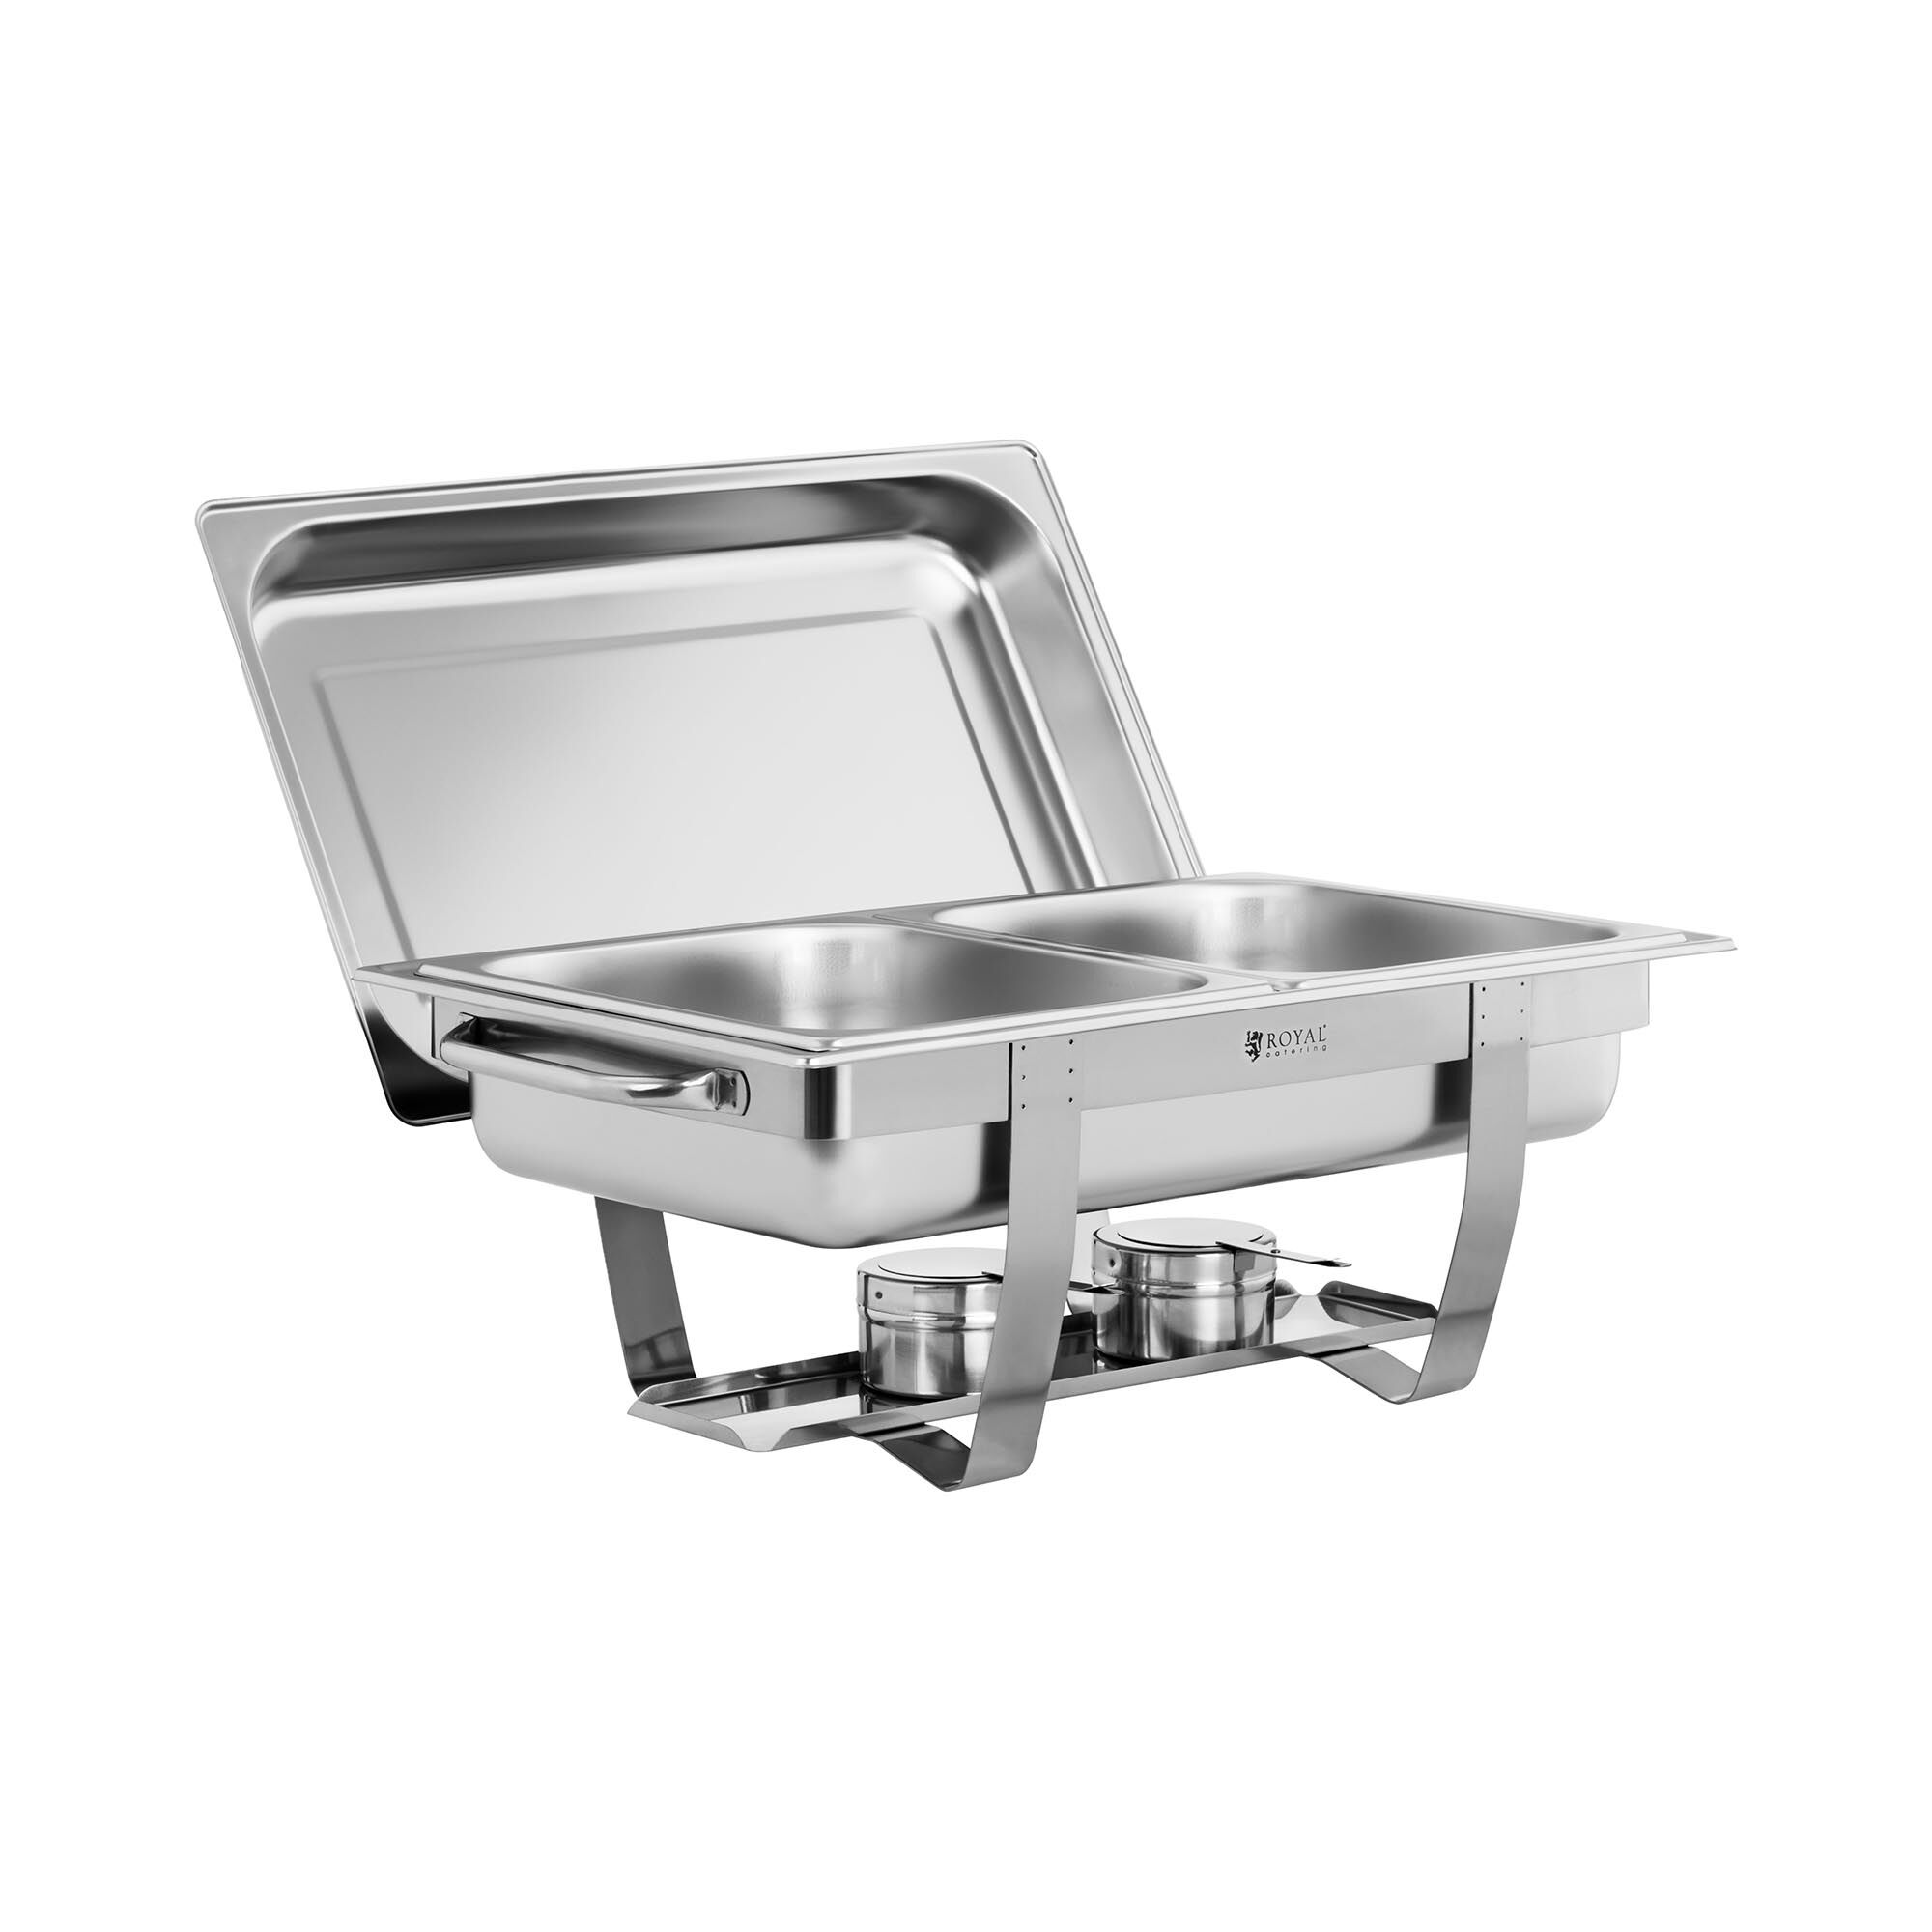 Royal Catering Chafing Dish - 2 x GN 1/2 - 11 L - 2 brandstofcontainers 10011371